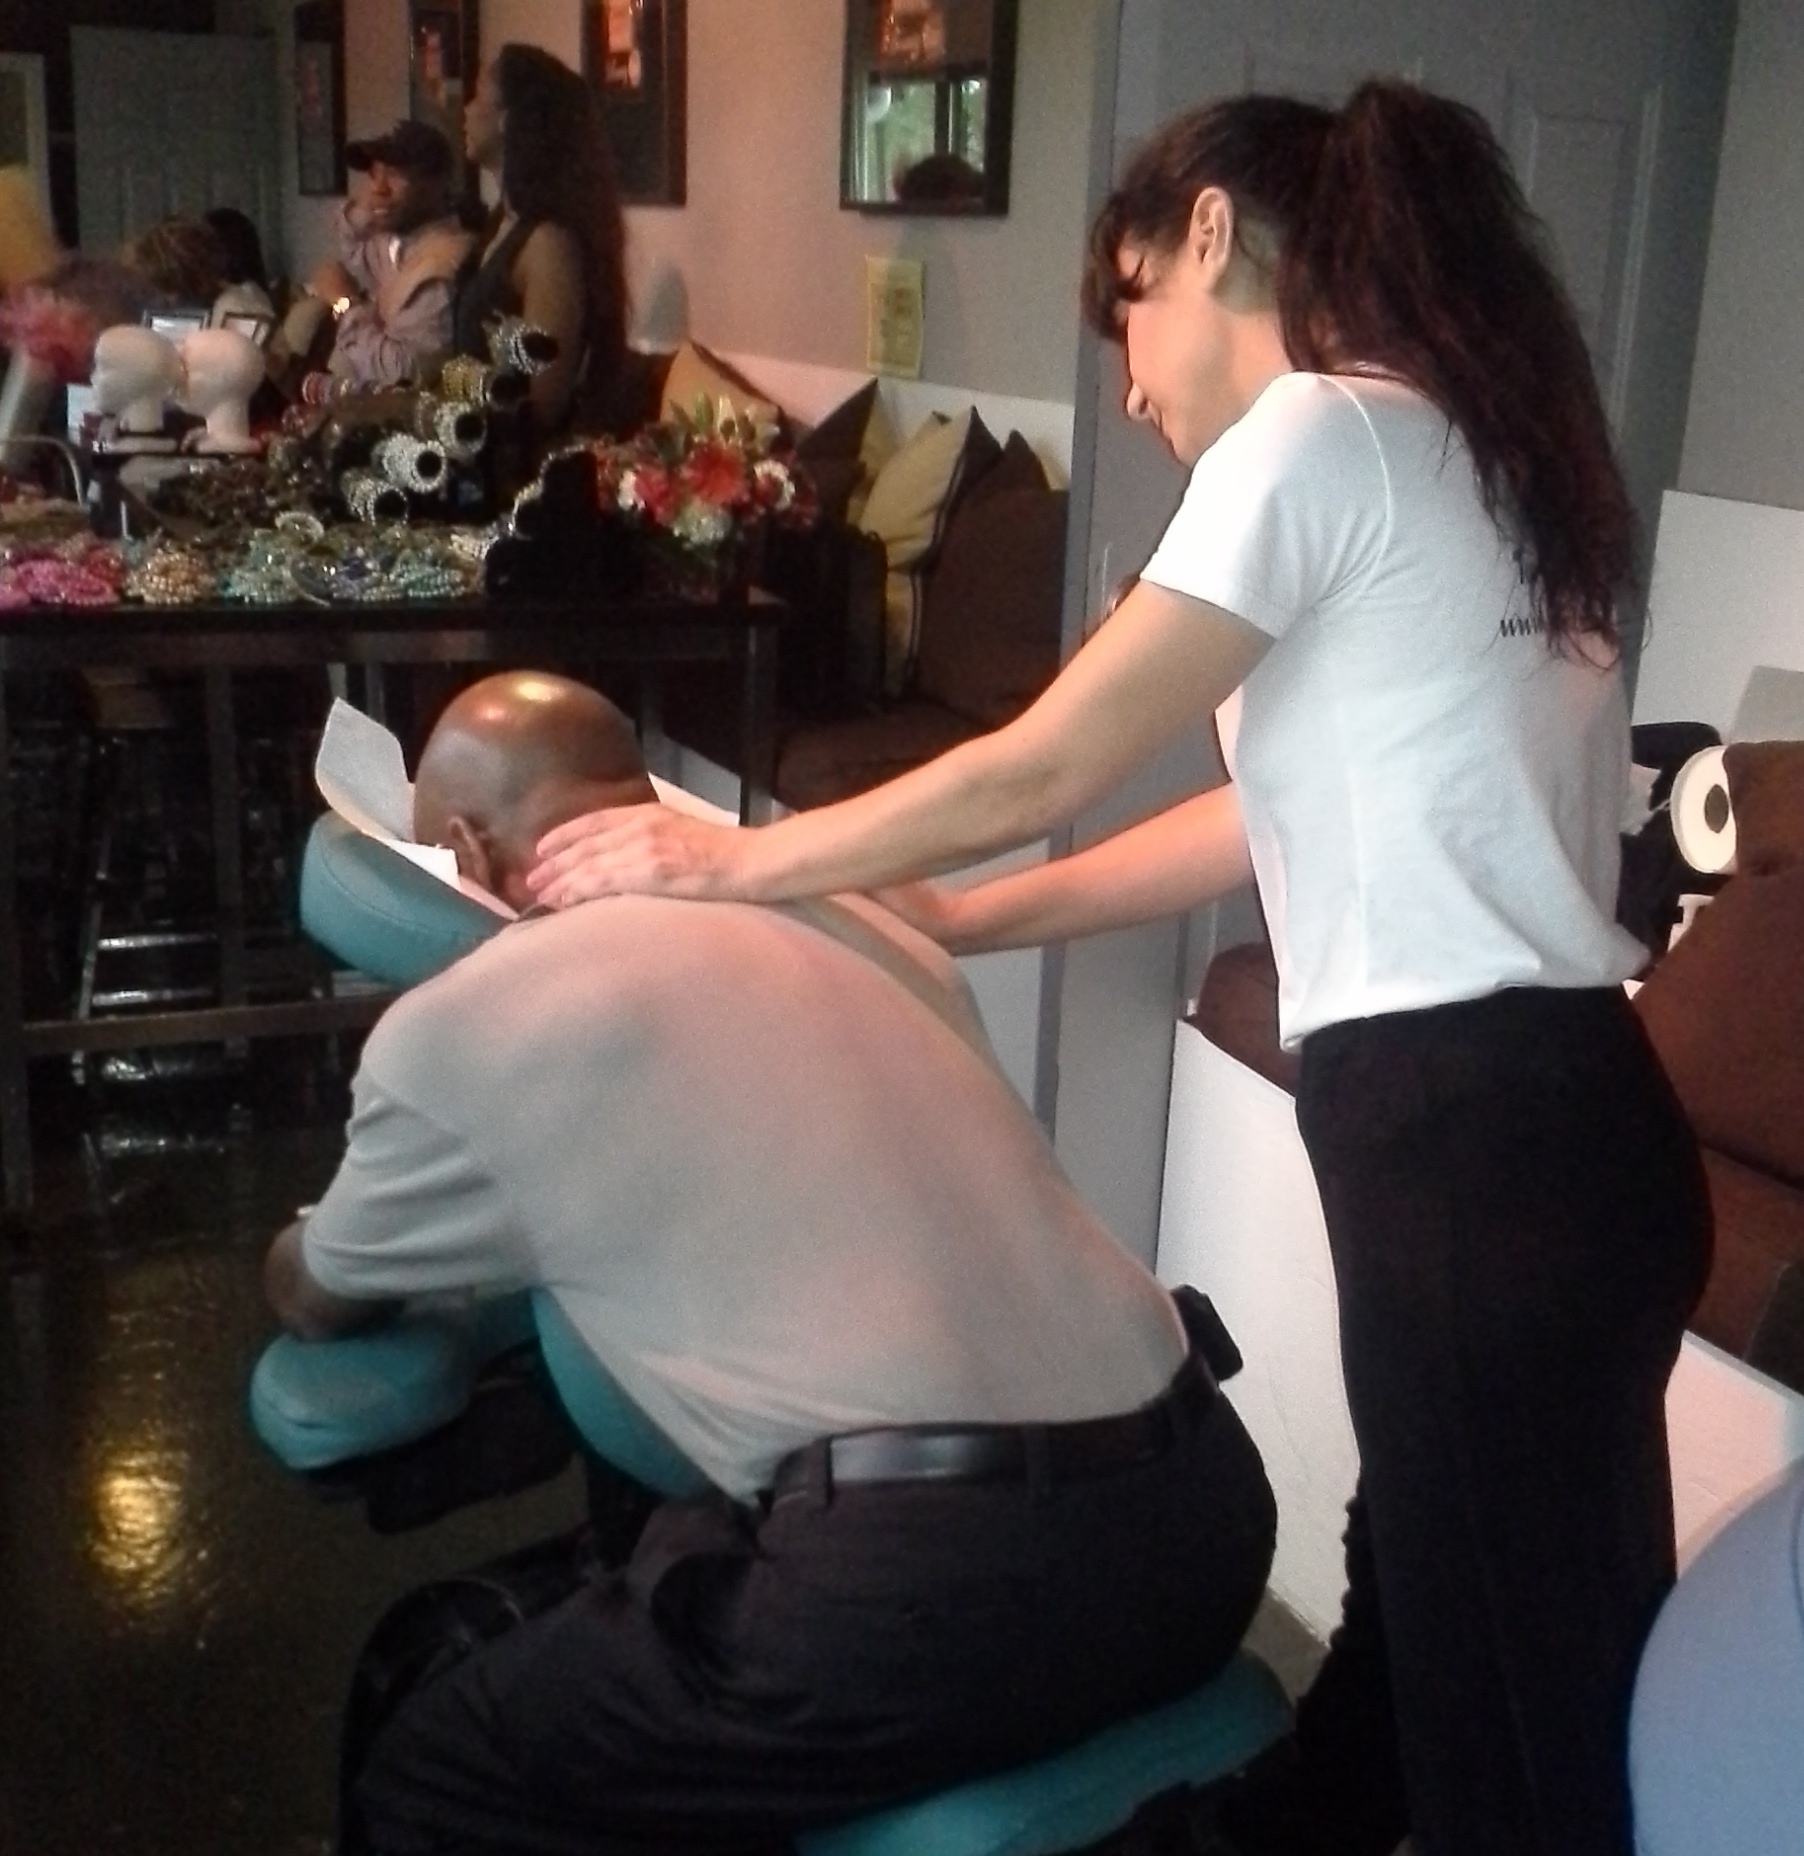 Chair Massage Benefits An Easy And Convenient Way To Improve Health